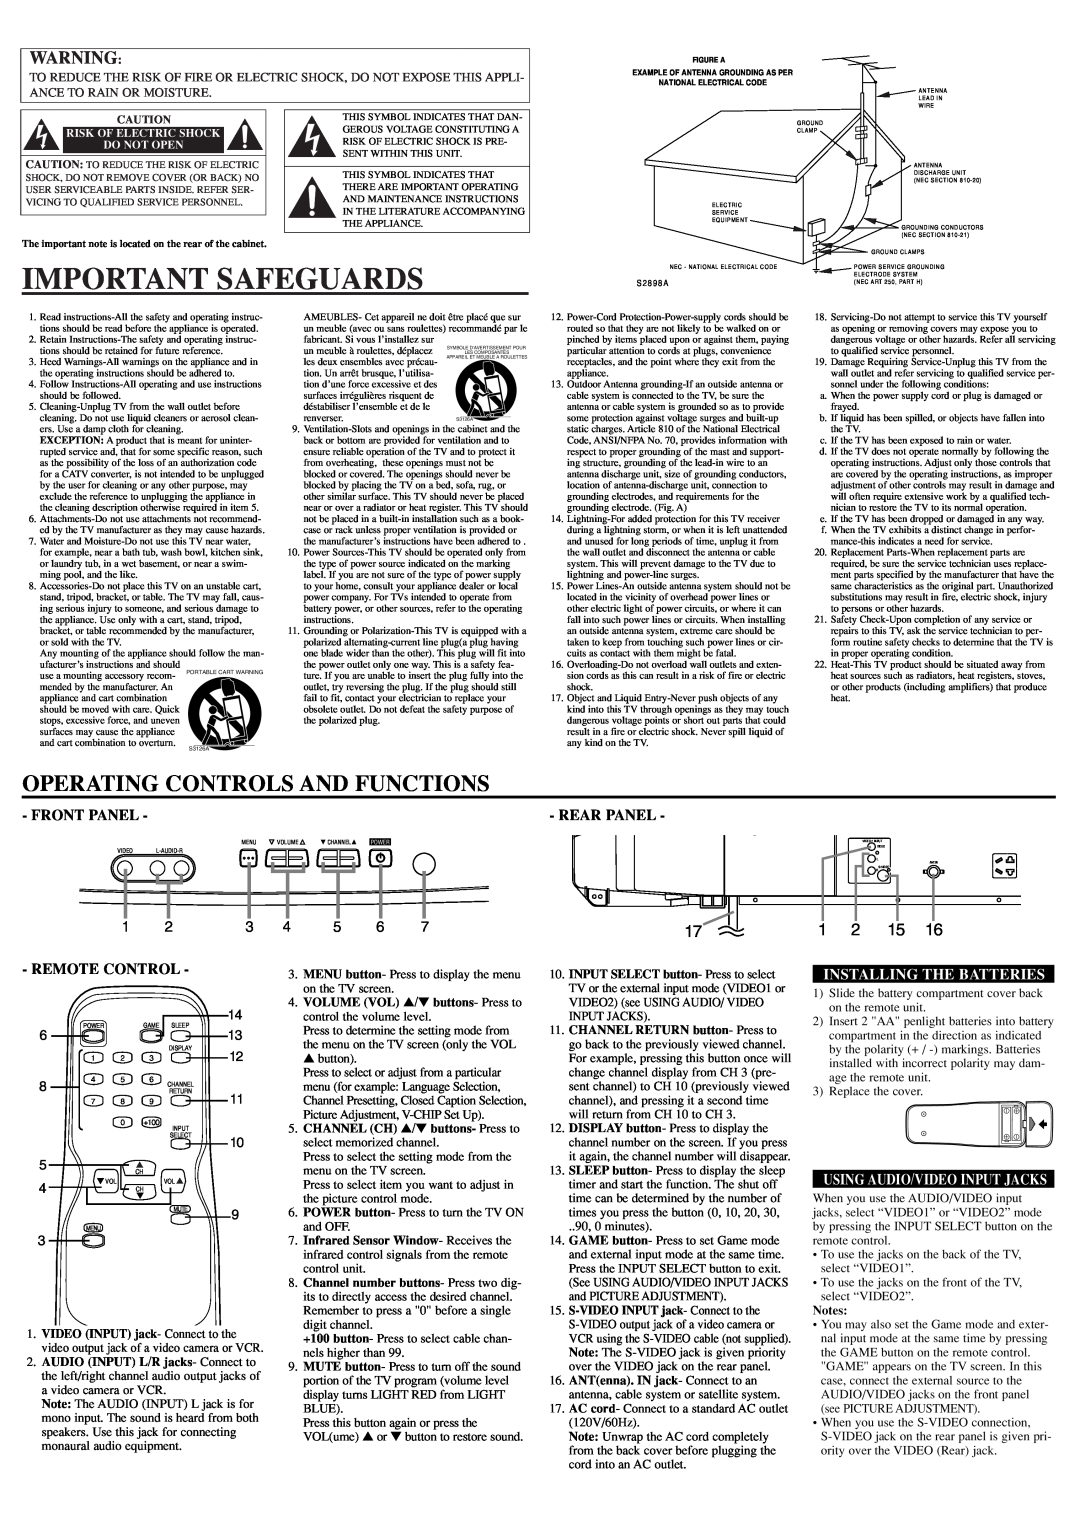 Sylvania RSET432E owner manual Important Safeguards, 1 2 15, Rear Panel, Remote Control, Installing The Batteries, 4 5 6 